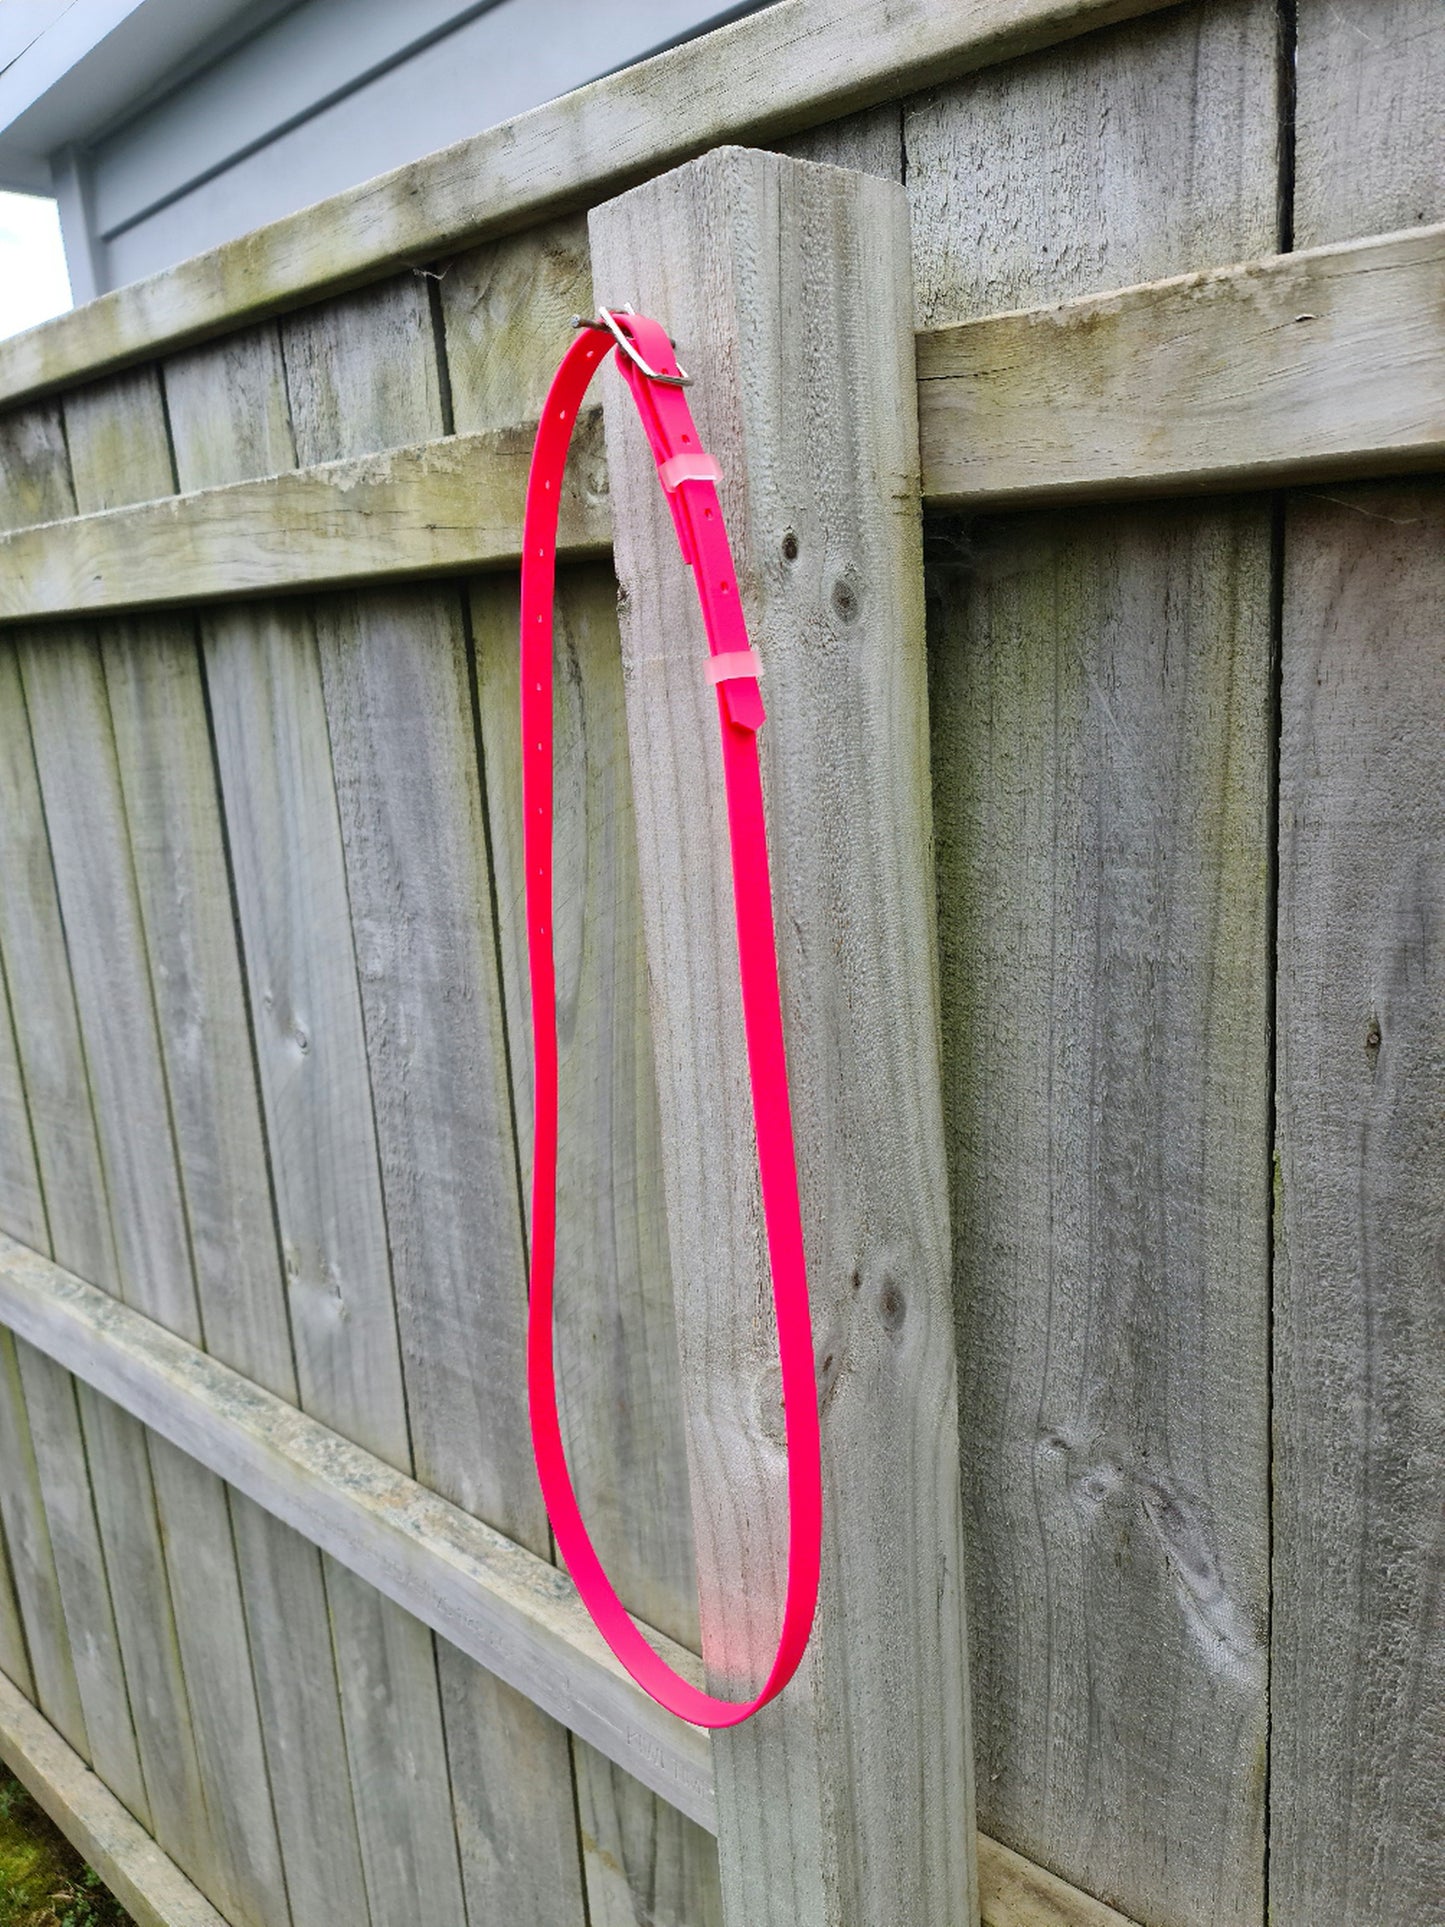 An "Oh Shoot" Neck strap from LS Equestrian made of vibrant pink, transparent BioThane material is hanging on a gray wooden fence. The buckle is fastened, and the neck strap appears slightly curved against the vertical post of the fence. The background shows the top edge of the fence with some visible sky.